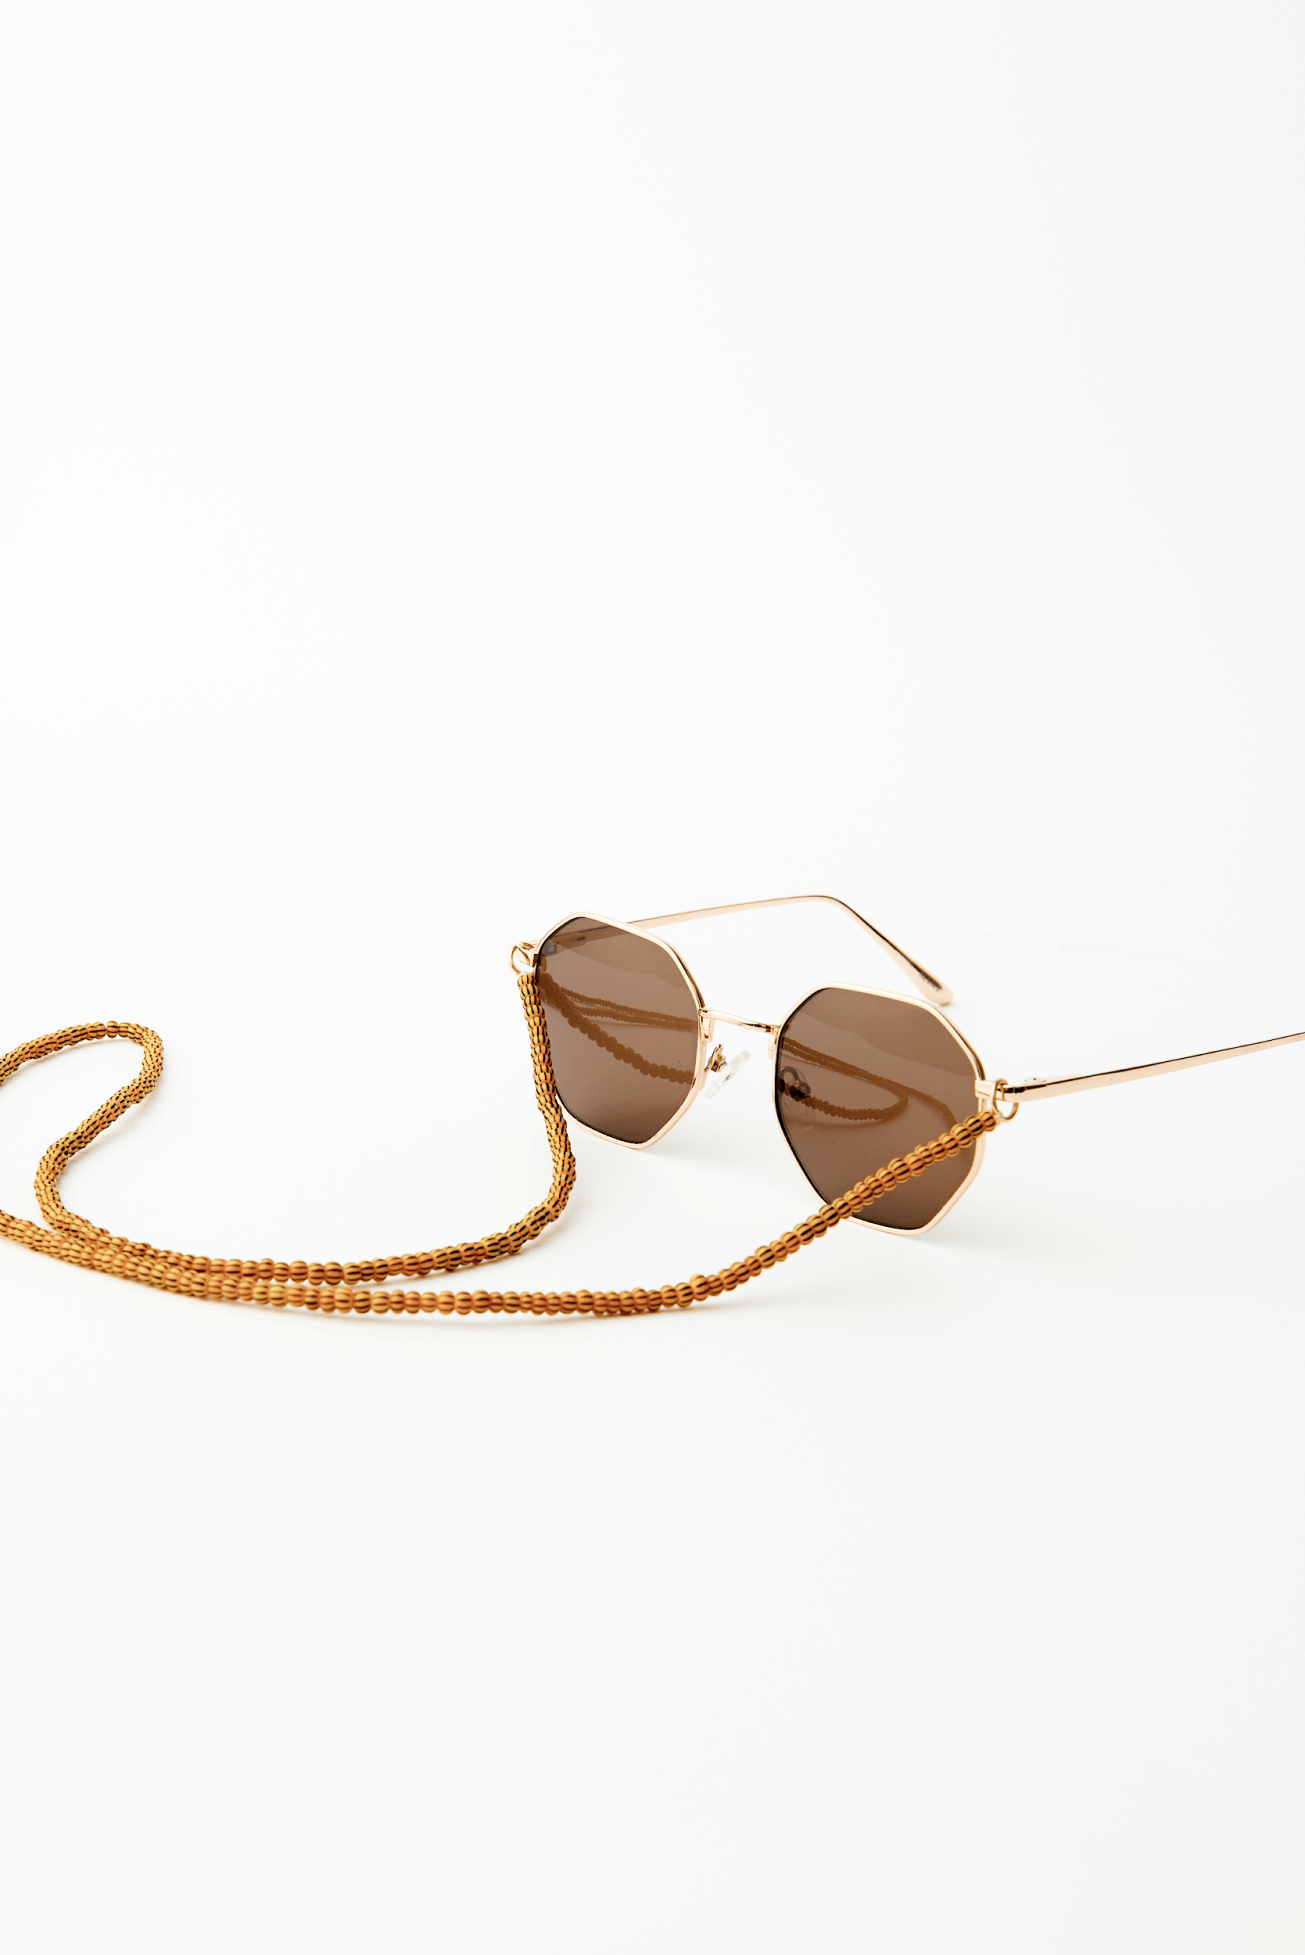 Shop The Arthur Sunglasses Cord by Soluna Collections on Arrai. Discover stylish, affordable clothing, jewelry, handbags and unique handmade pieces from top Kenyan & African fashion brands prioritising sustainability and quality craftsmanship.